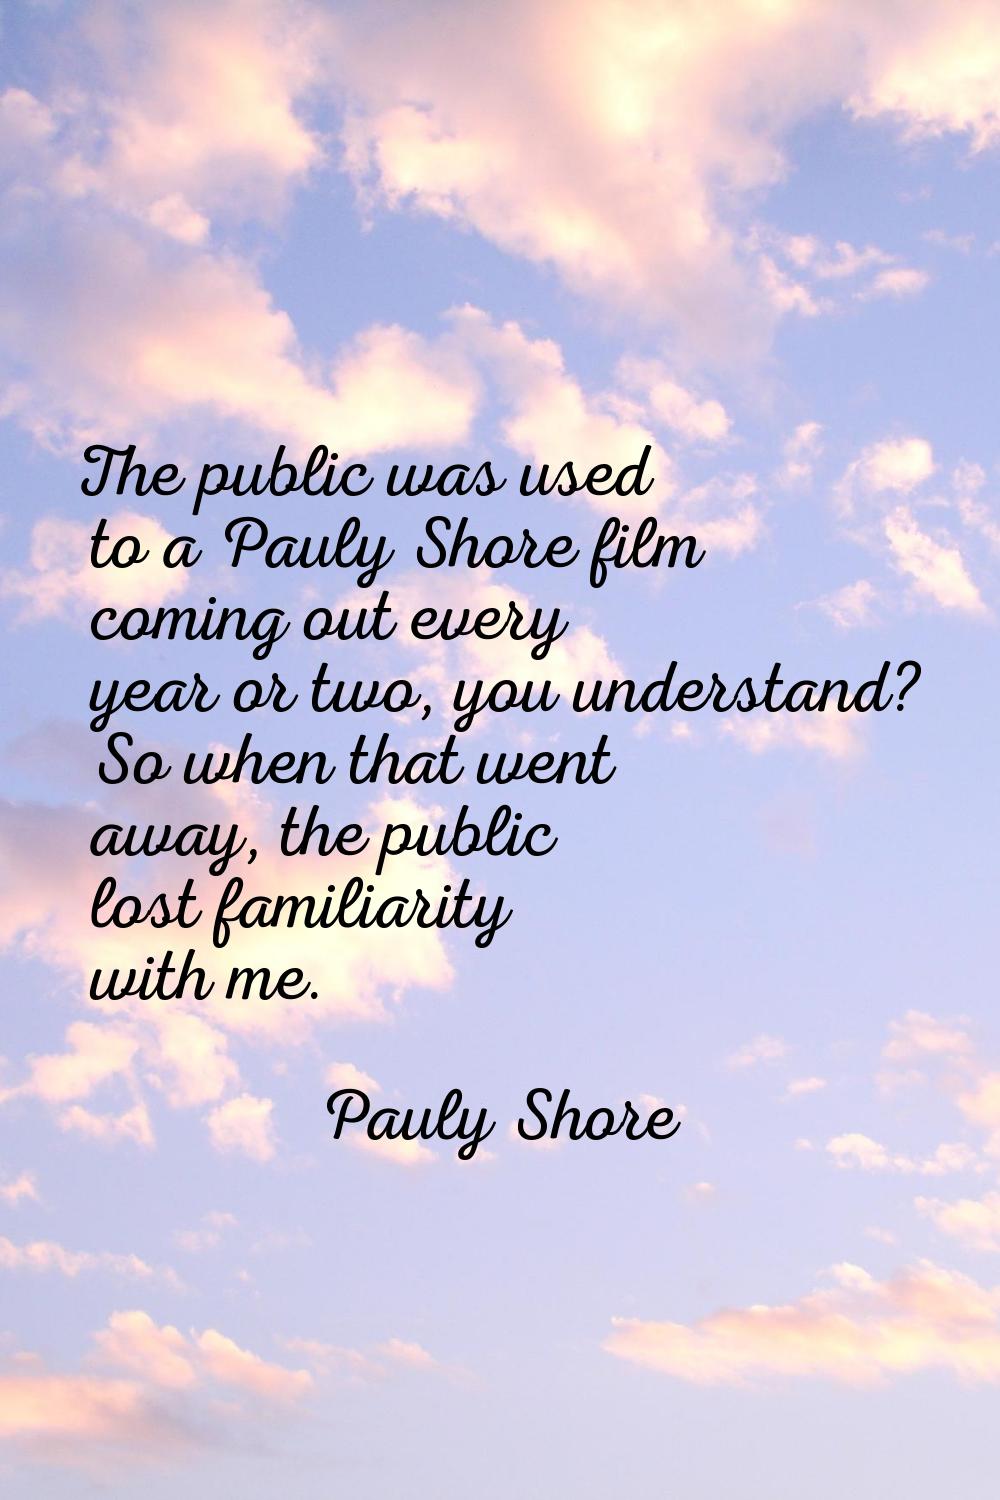 The public was used to a Pauly Shore film coming out every year or two, you understand? So when tha